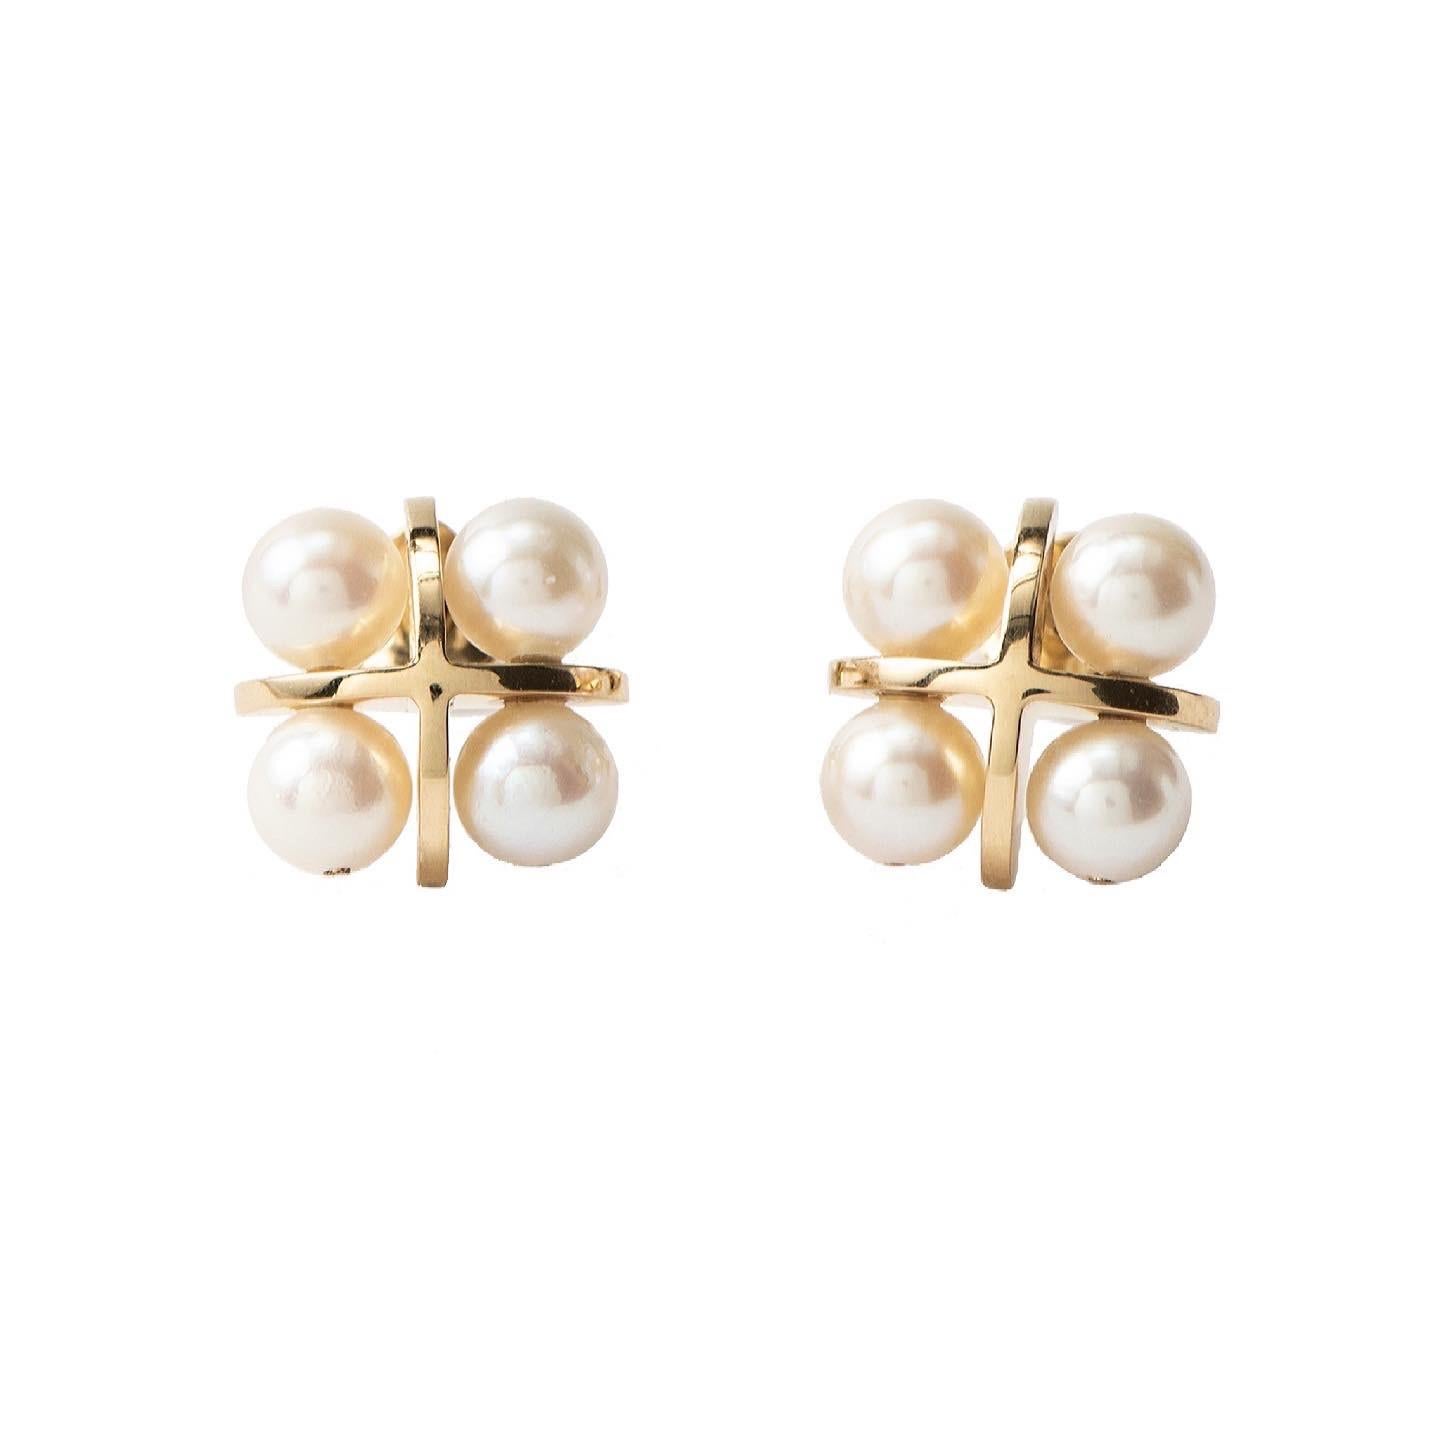 The ‘Pearl breeze’, ear jackets are crafted in 18K gold hallmarked in Cyprus. These impressive, playfully romantic ear jackets come in a highly polished finish and feel very light and comfortable on the ear. Each of the Studs, that can also be worn